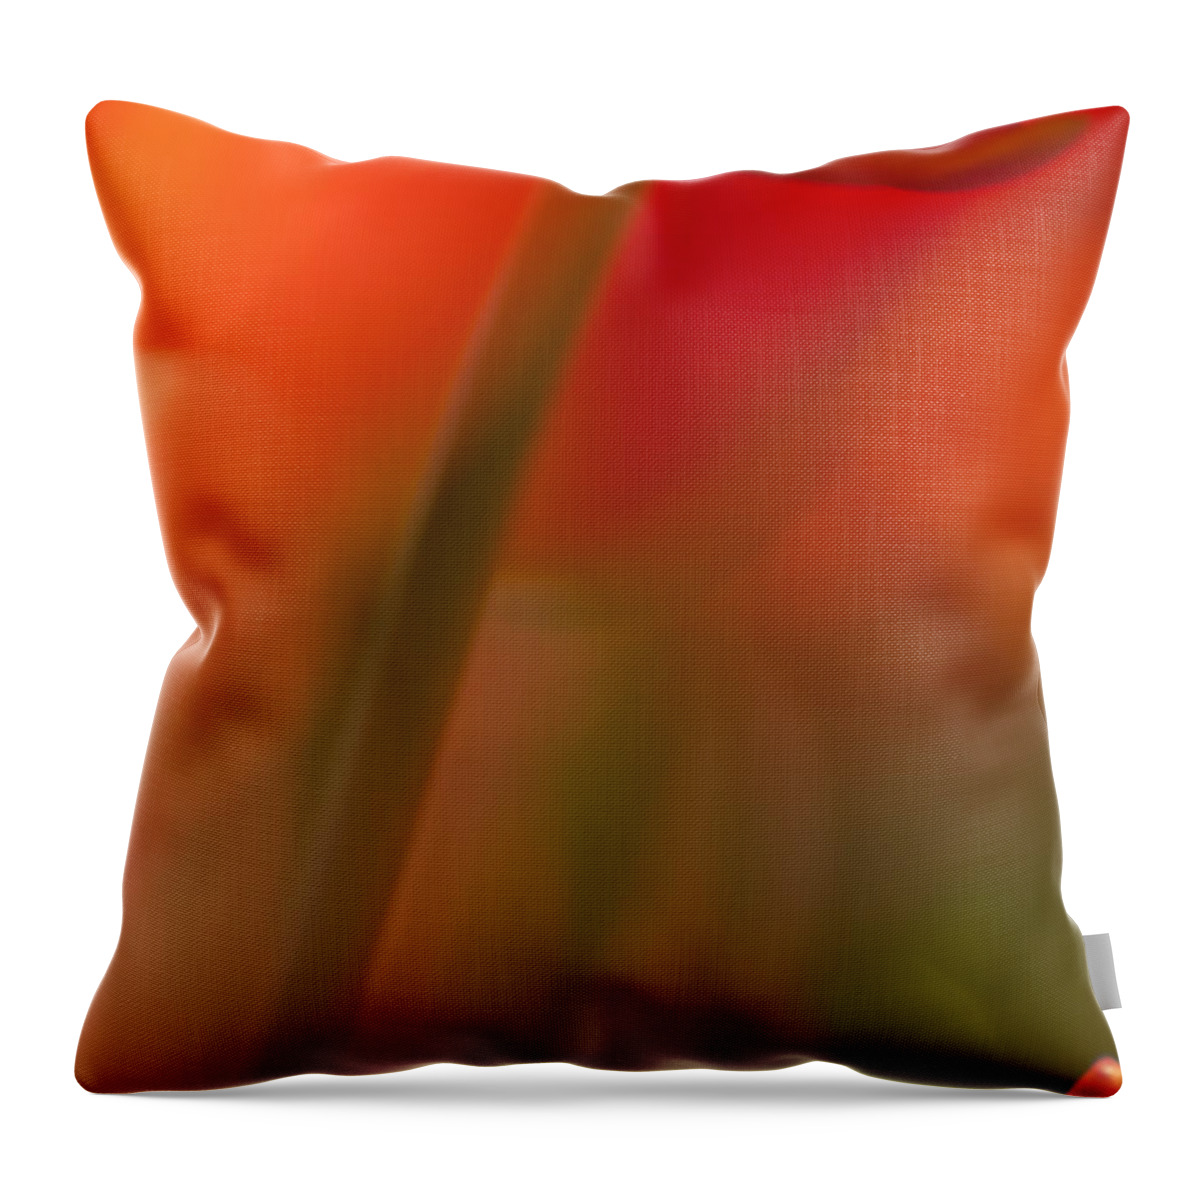 Tulips Throw Pillow featuring the photograph Orange Tulip Abstract by Jani Freimann